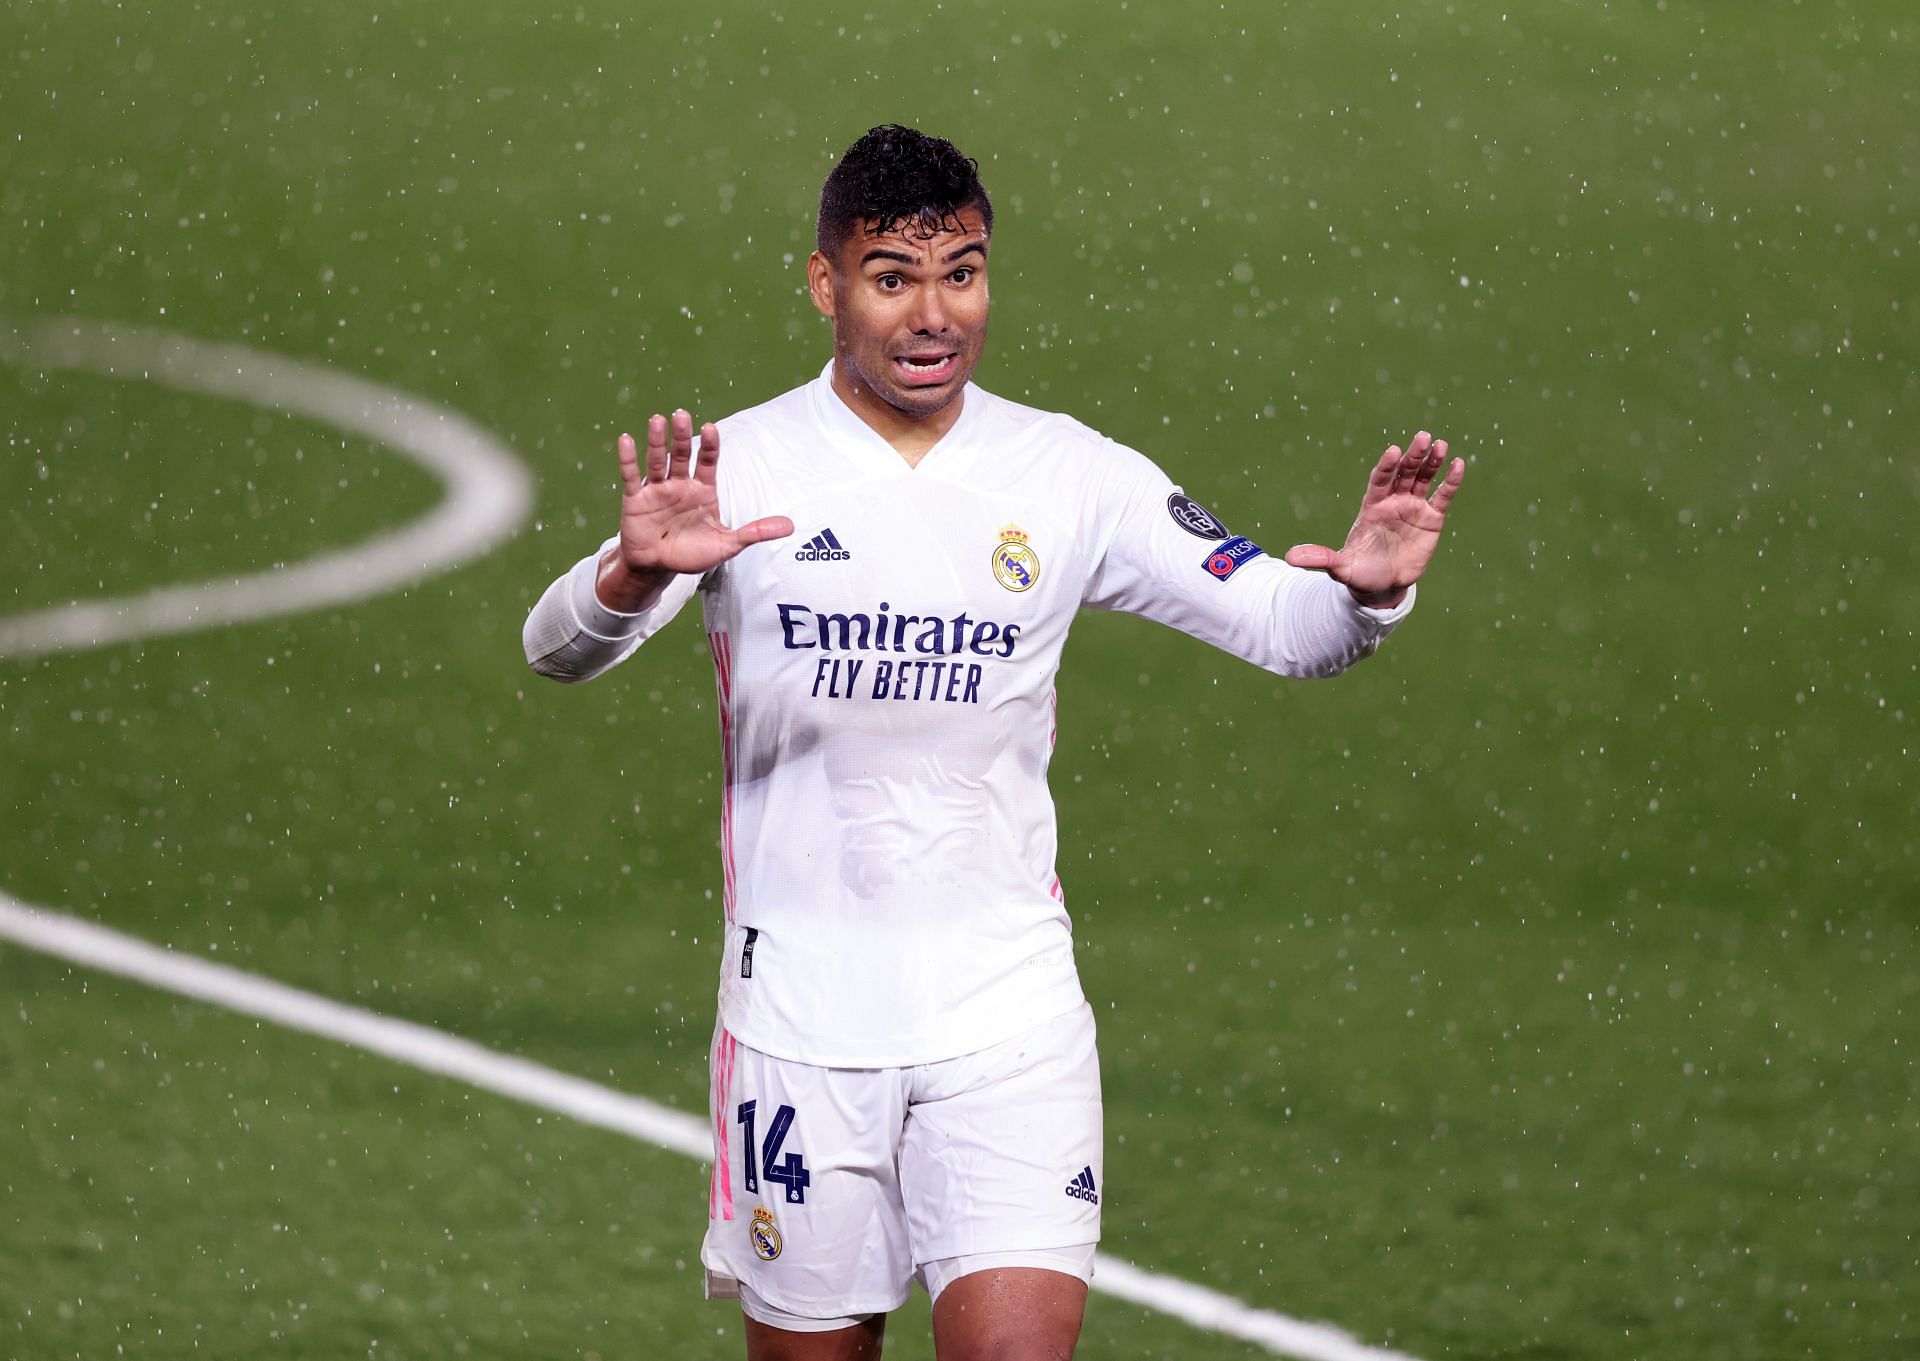 Casemiro has been invaluable for Real Madrid